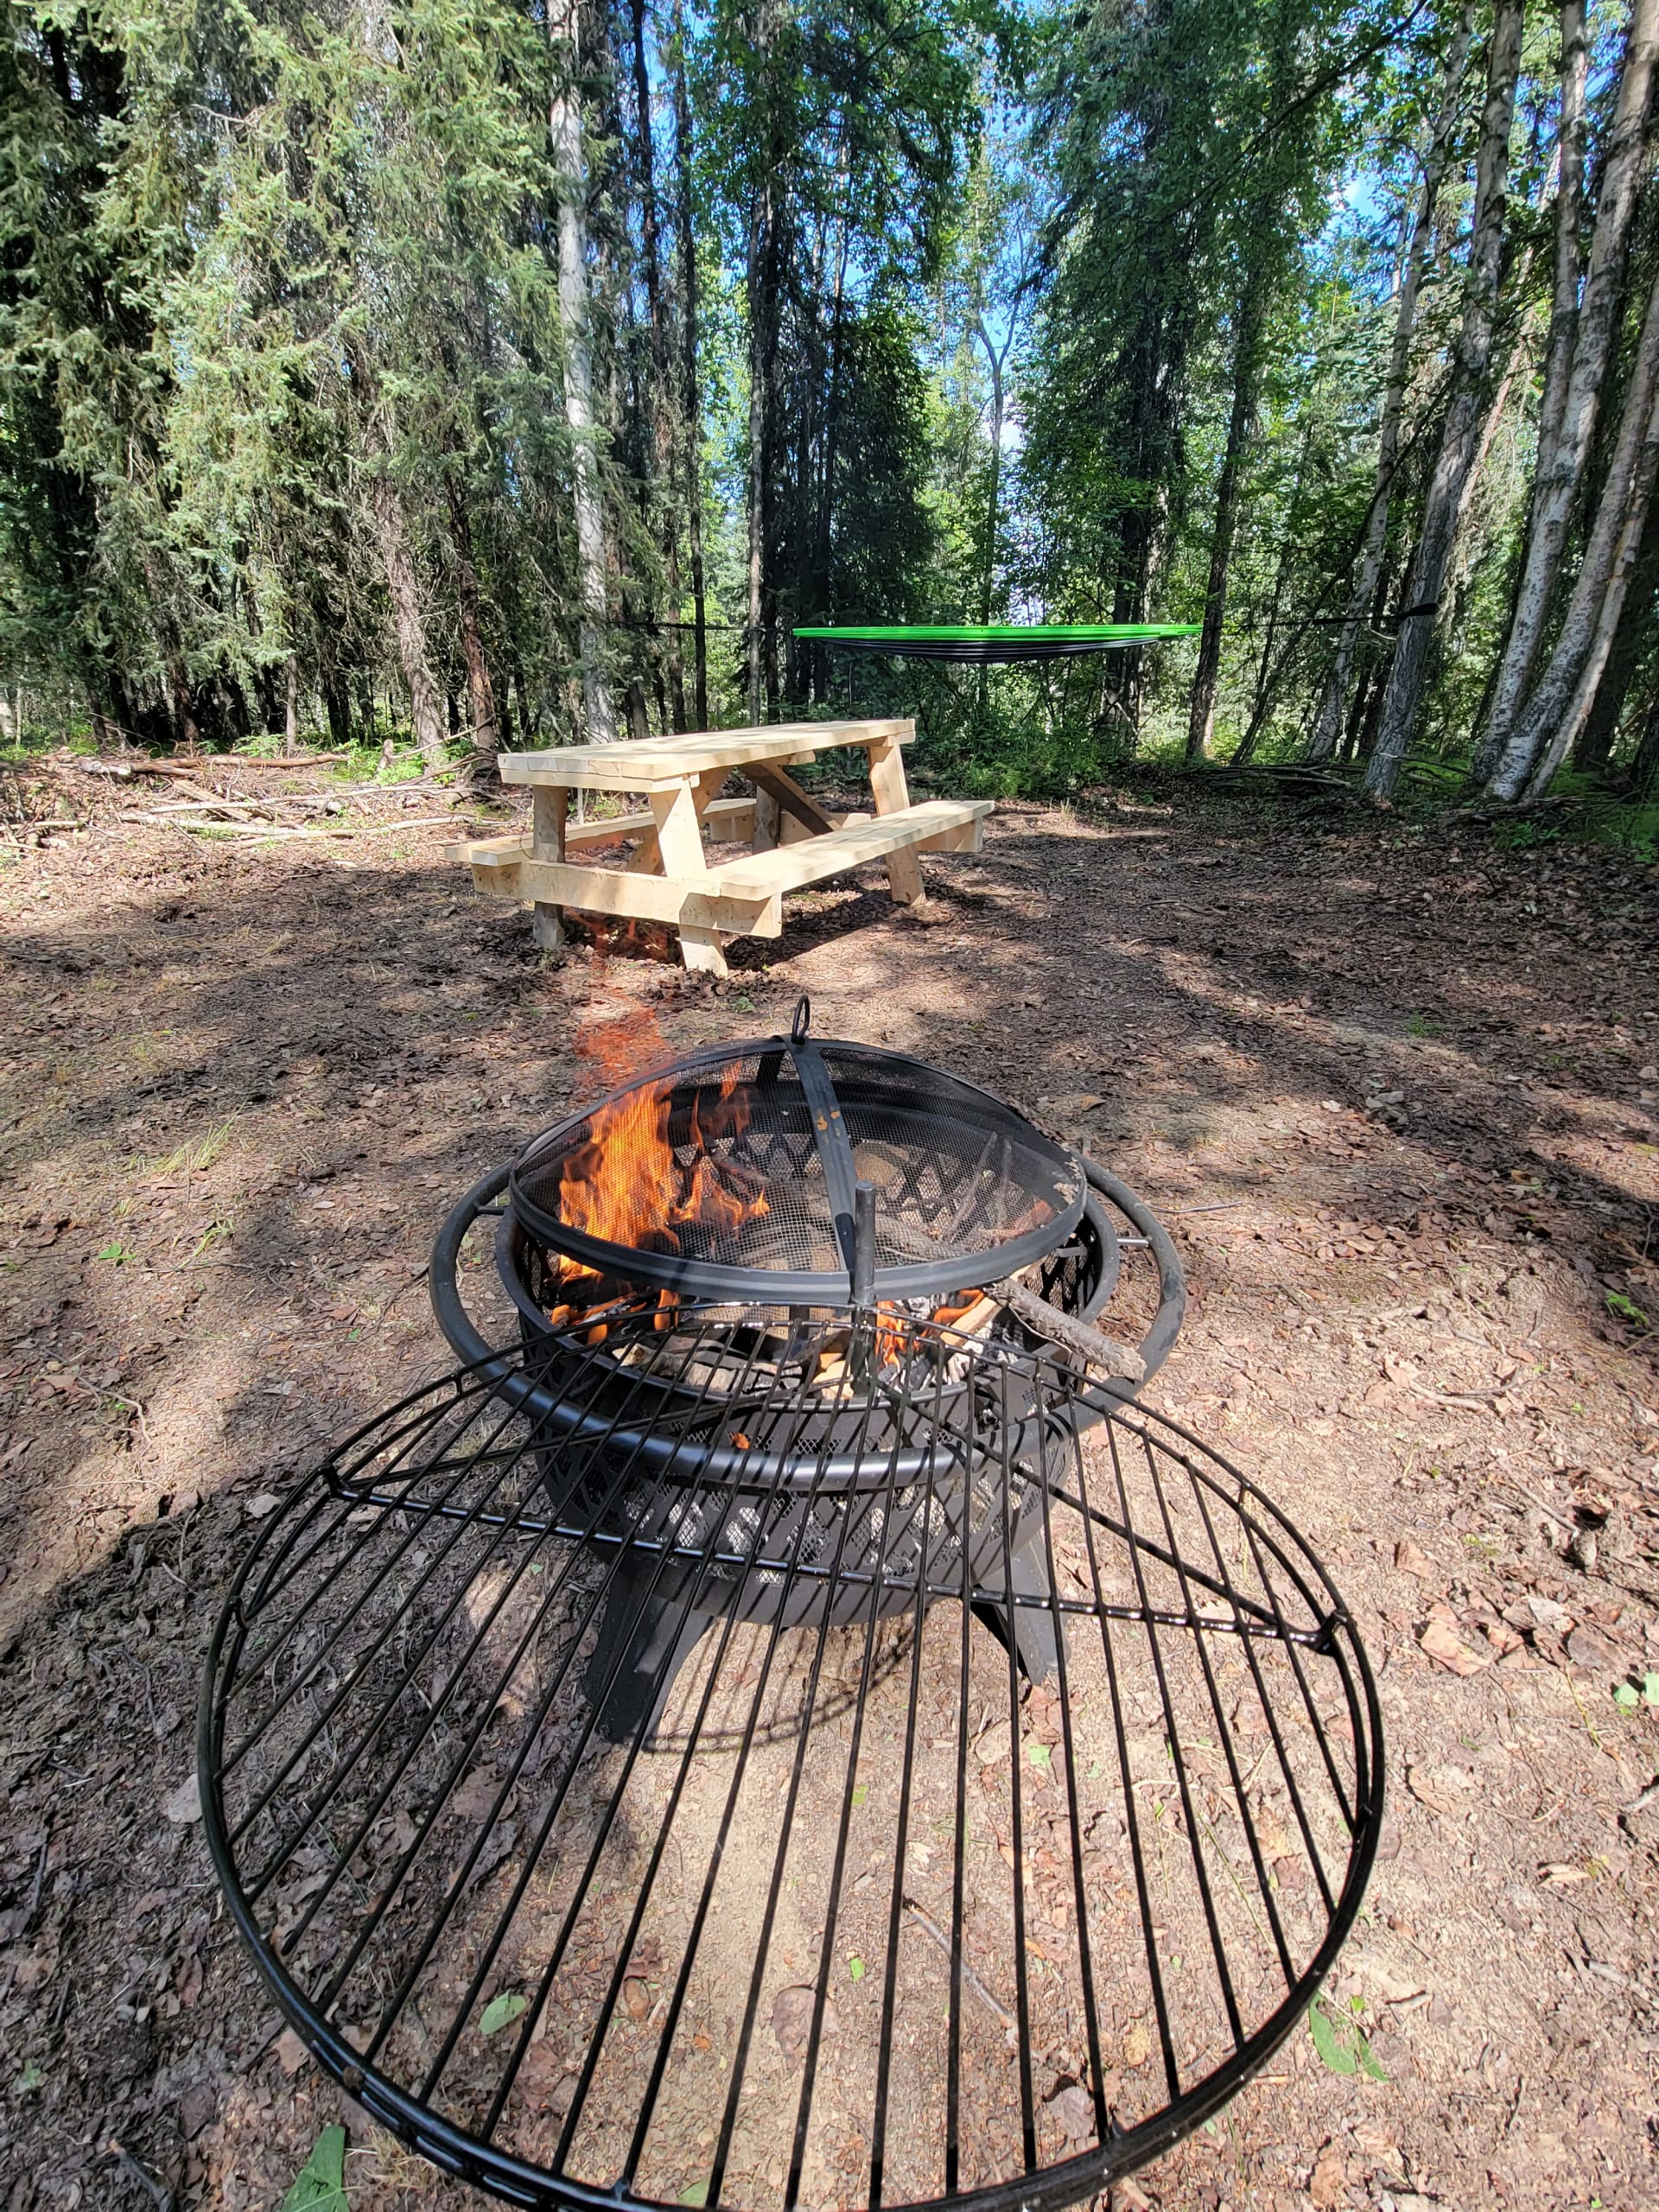 Cooking over the fire!
#Alaskalife